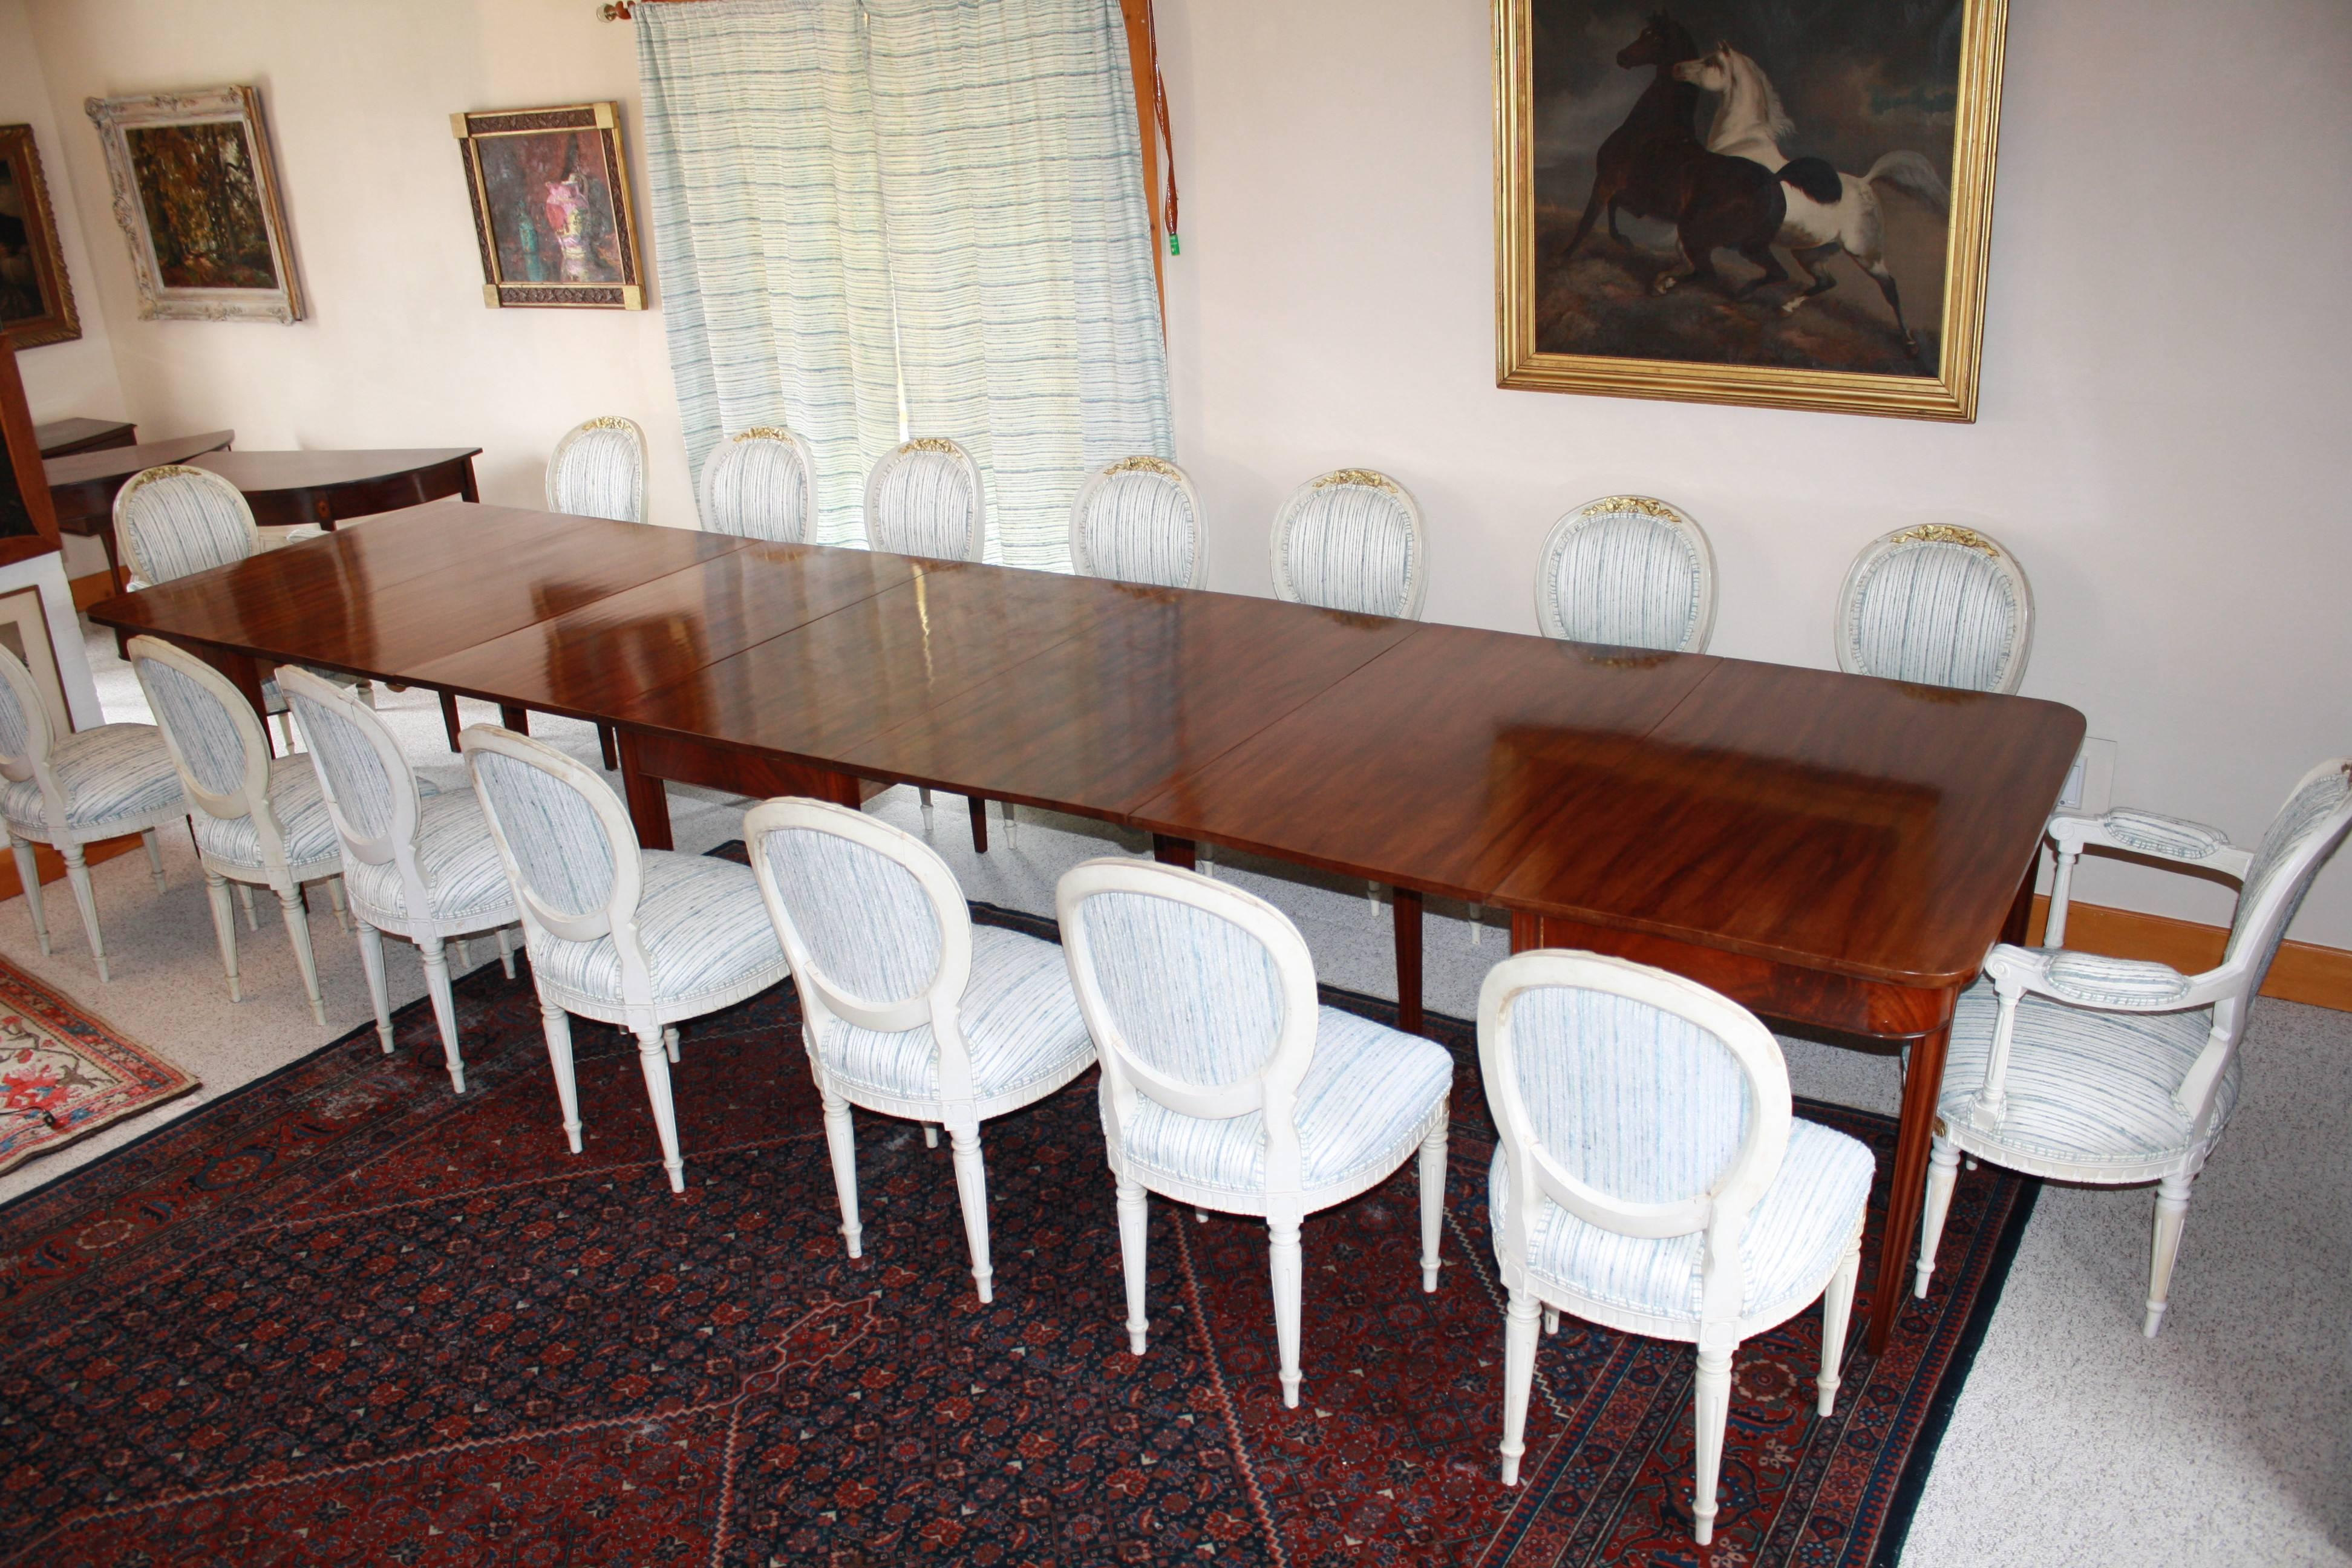 An American Centennial tripartite banquet table in the Hepplewhite manner, bench-made in 1880 and acquired by the German Embassy in Washington D.C.  Handcrafted Honduran mahogany on tapering corner-fluted legs.  184 inches long, 48 inches wide, with